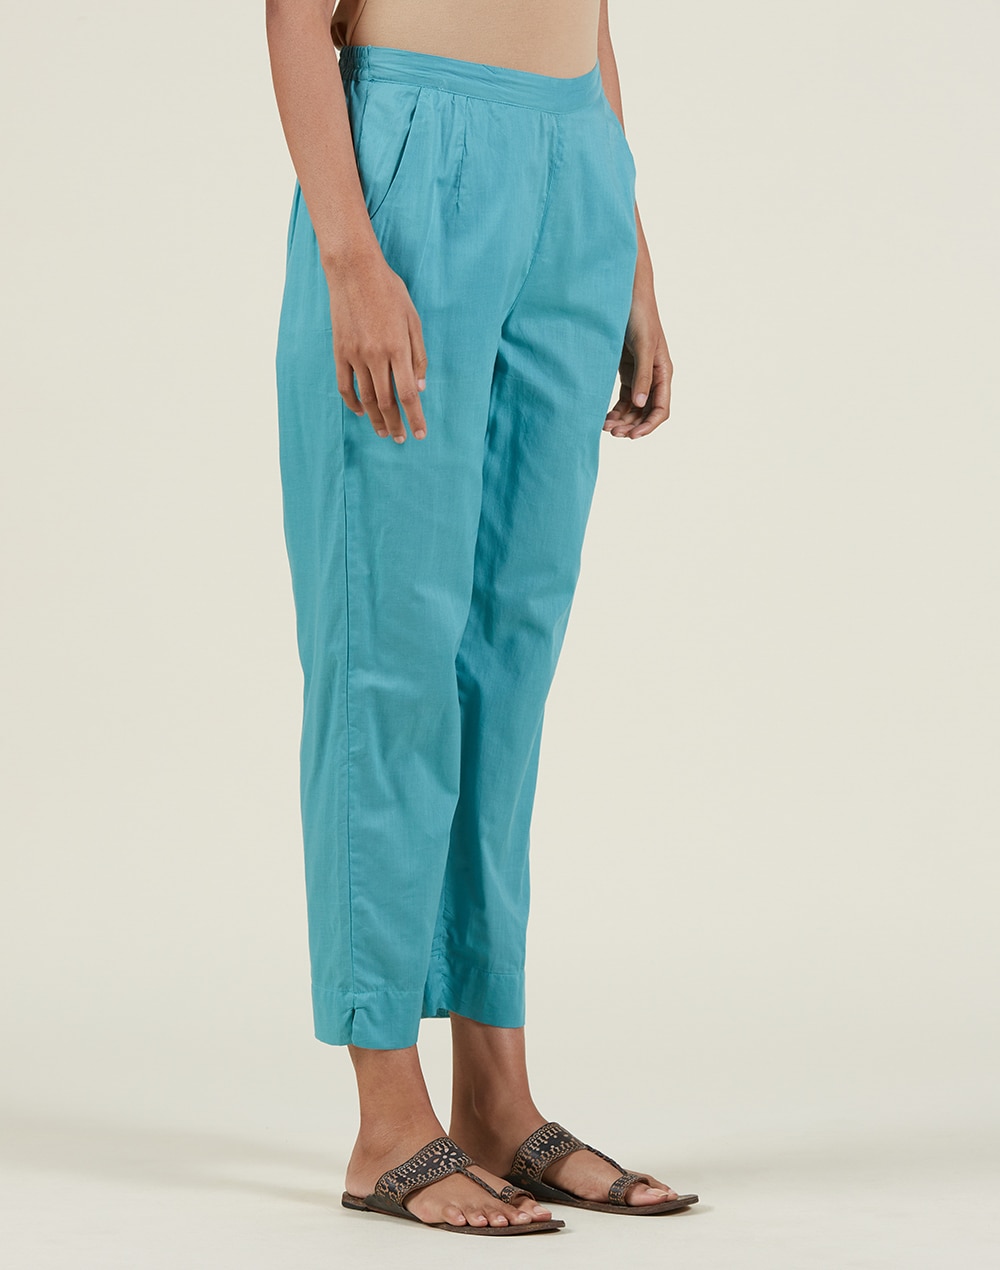 Cotton Elasticated Casual Pant